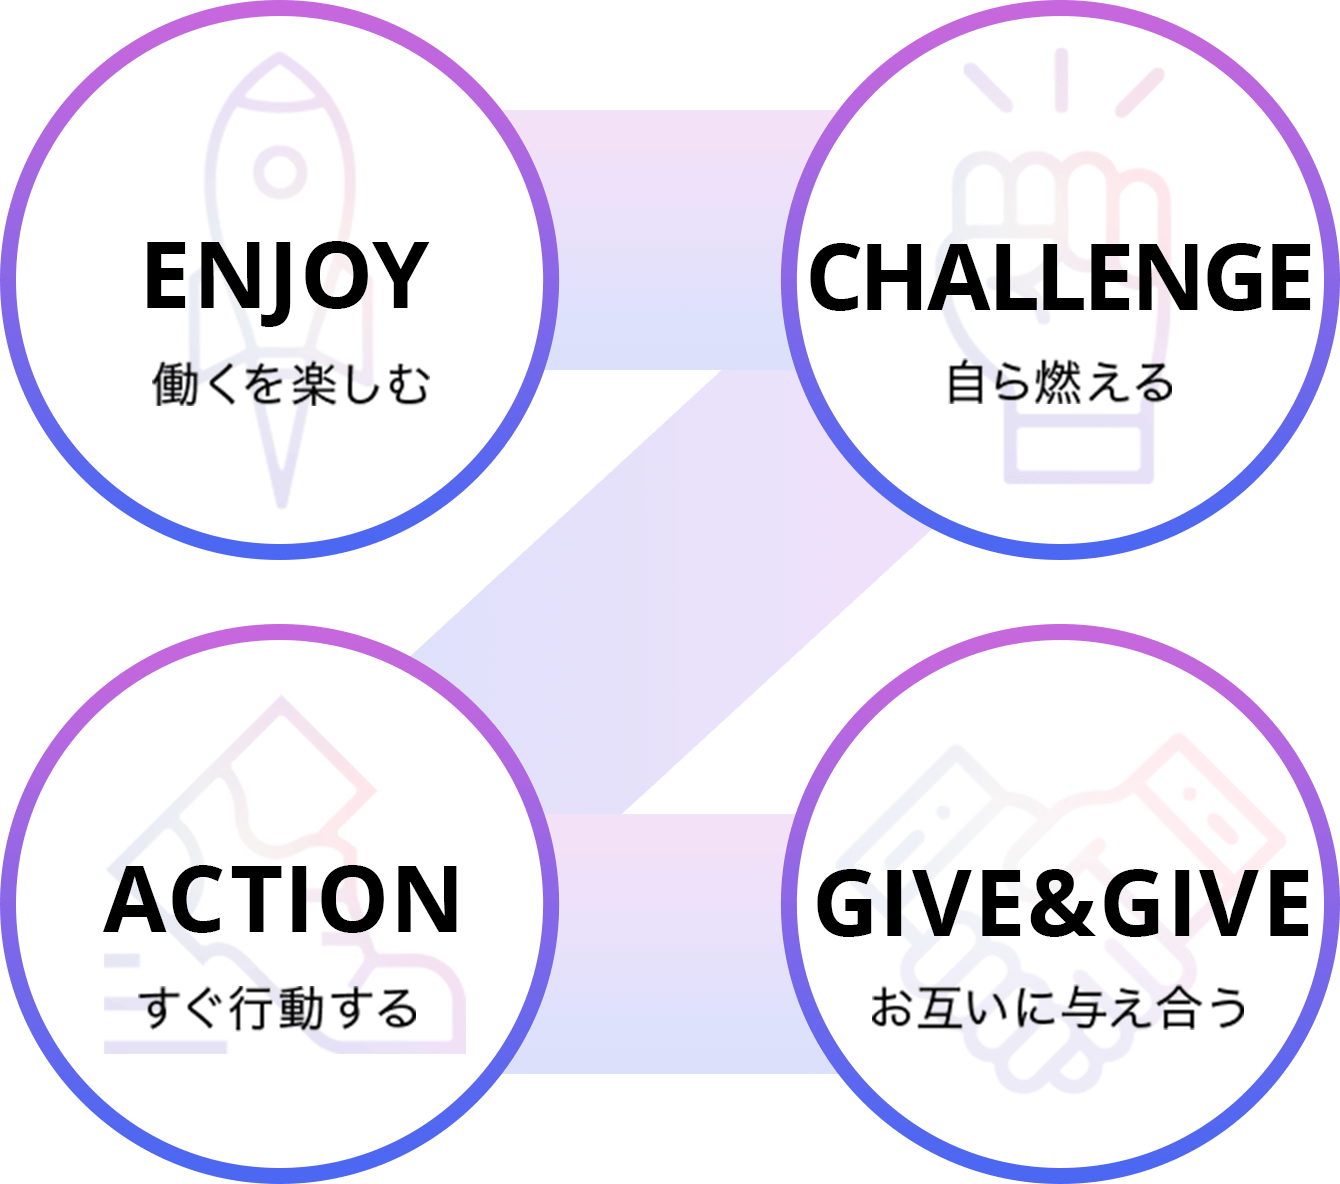 ENJOY CHALLENGE ACTION GIVE&GIVE